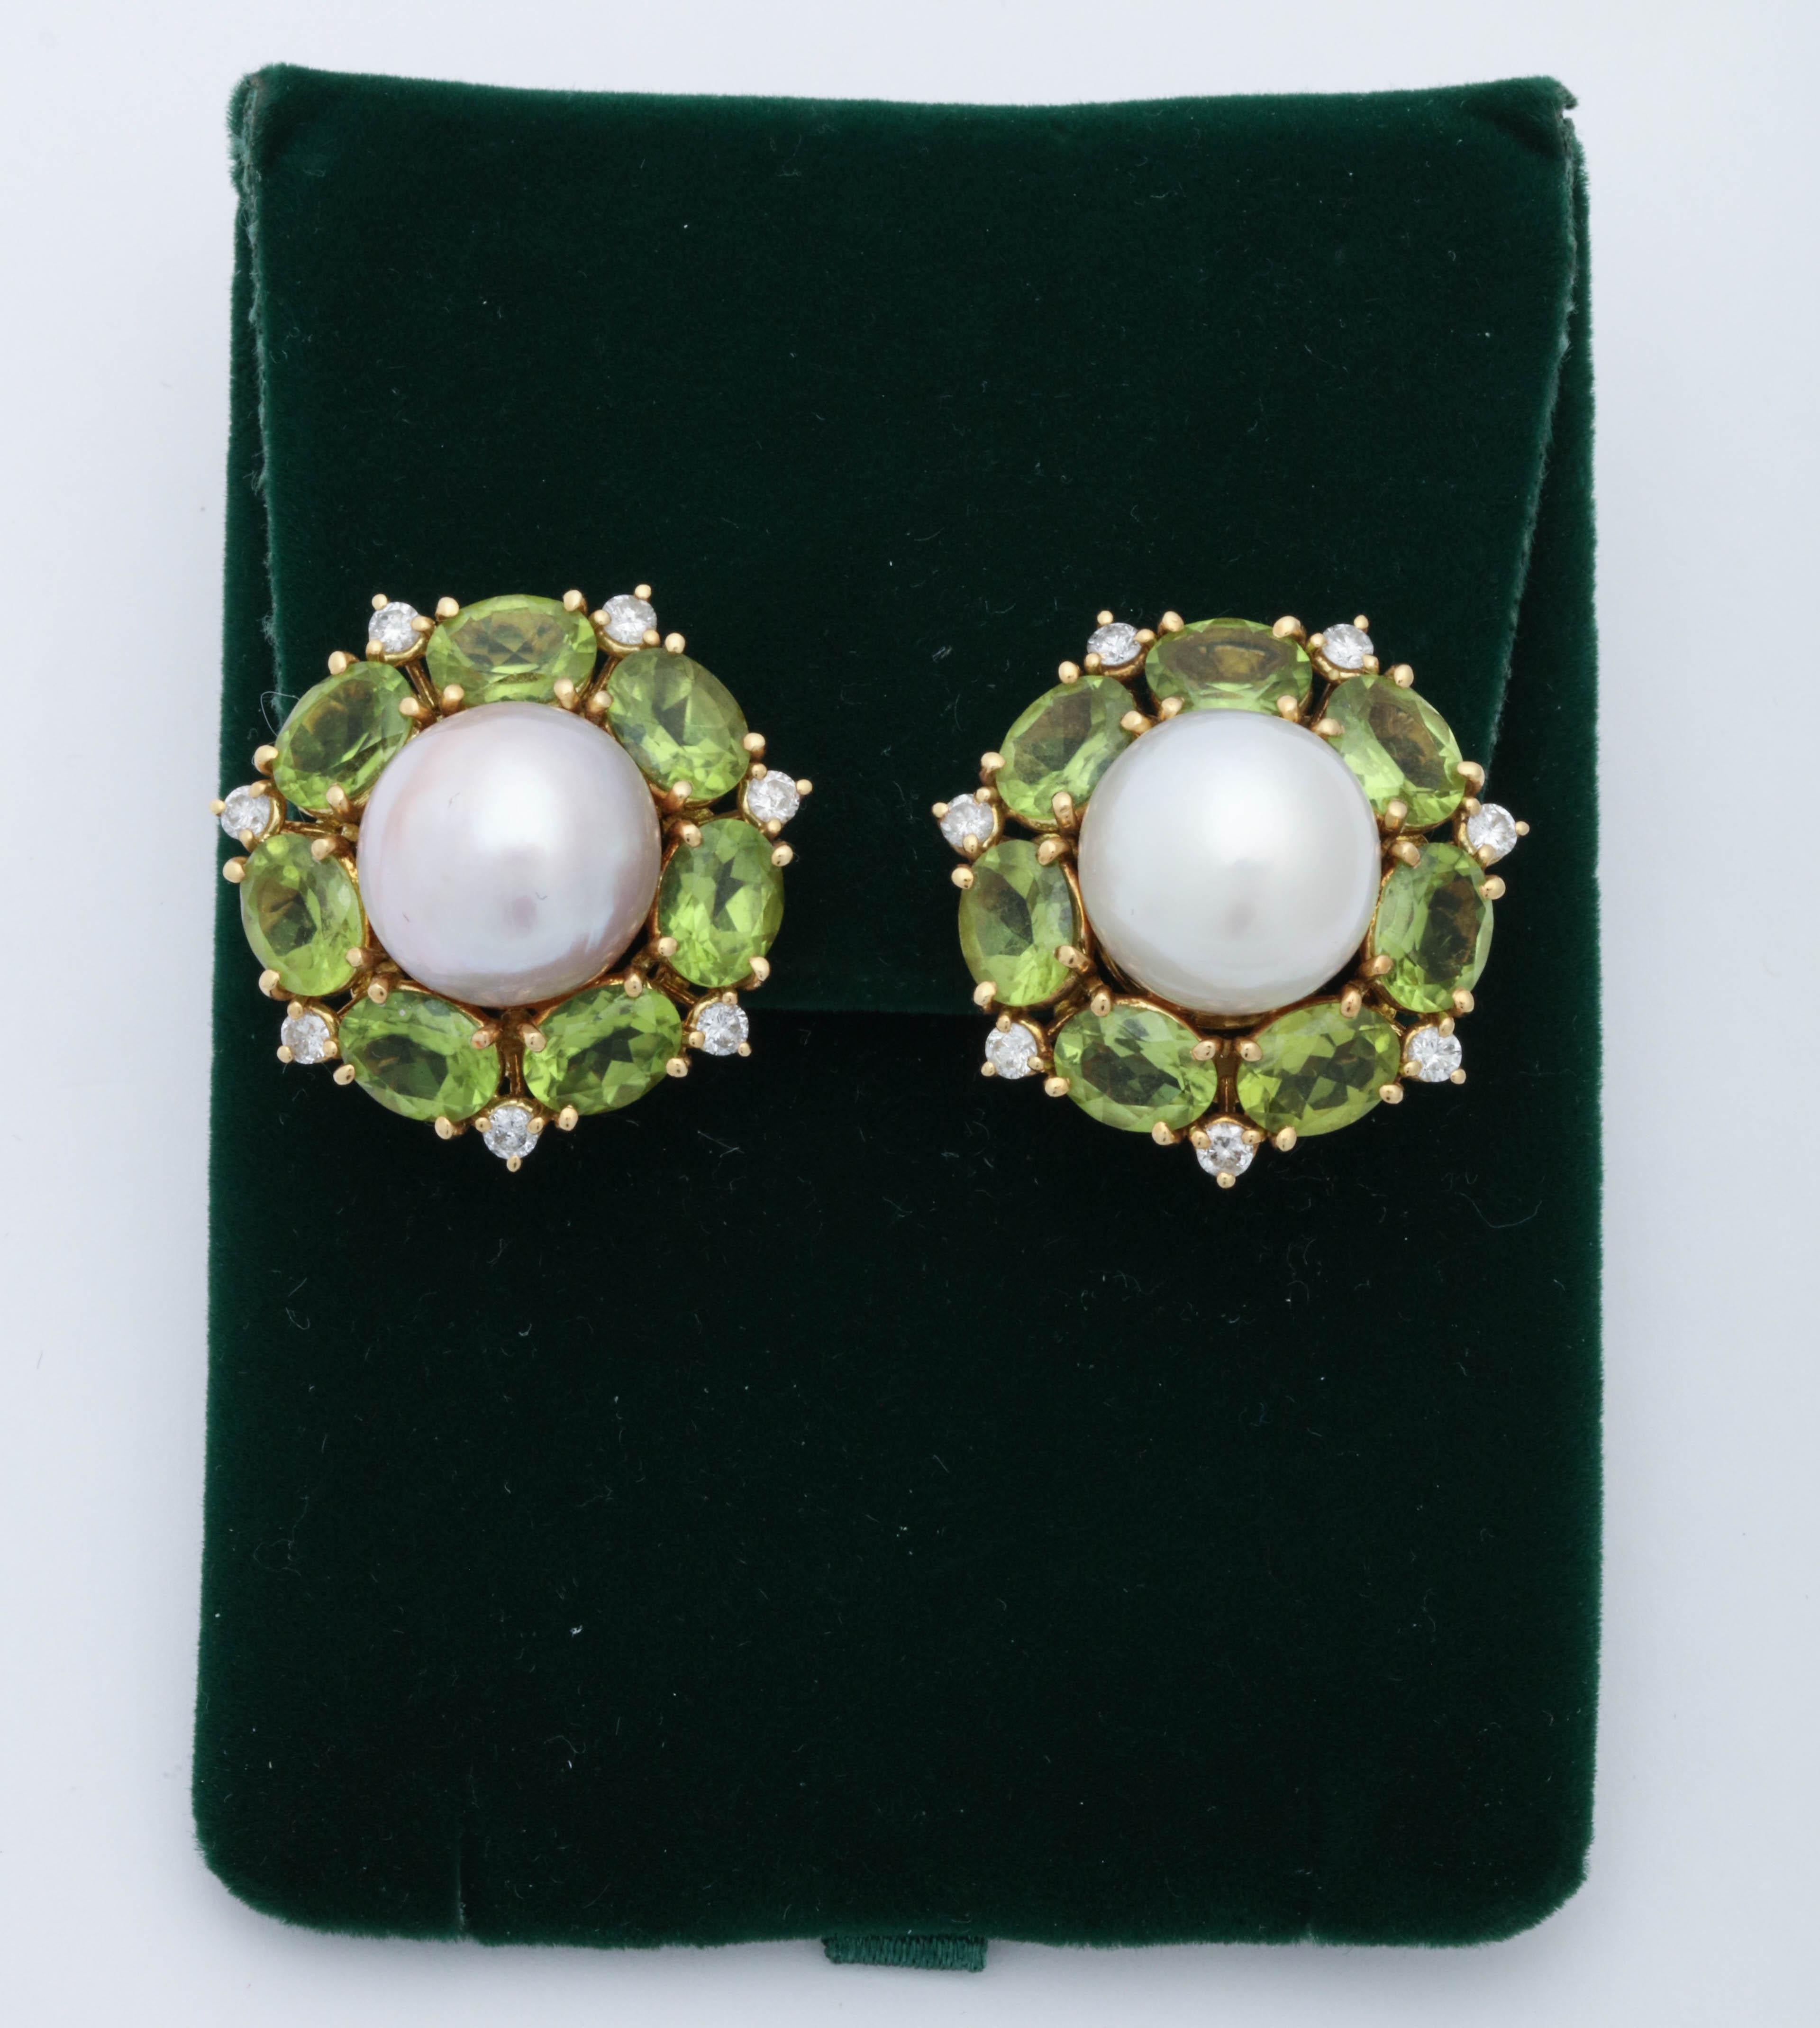 One Pair Of Ladies 18kt Yellow Gold Earclips Signed Seaman Schepps, Serial # 7541 Designed With Two South Sea Pearls Measuring Approximately 12MM Each And Further Surrounded By 14 Oval Shaped Faceted Peridots Weighing Approximately 28 Carats Total